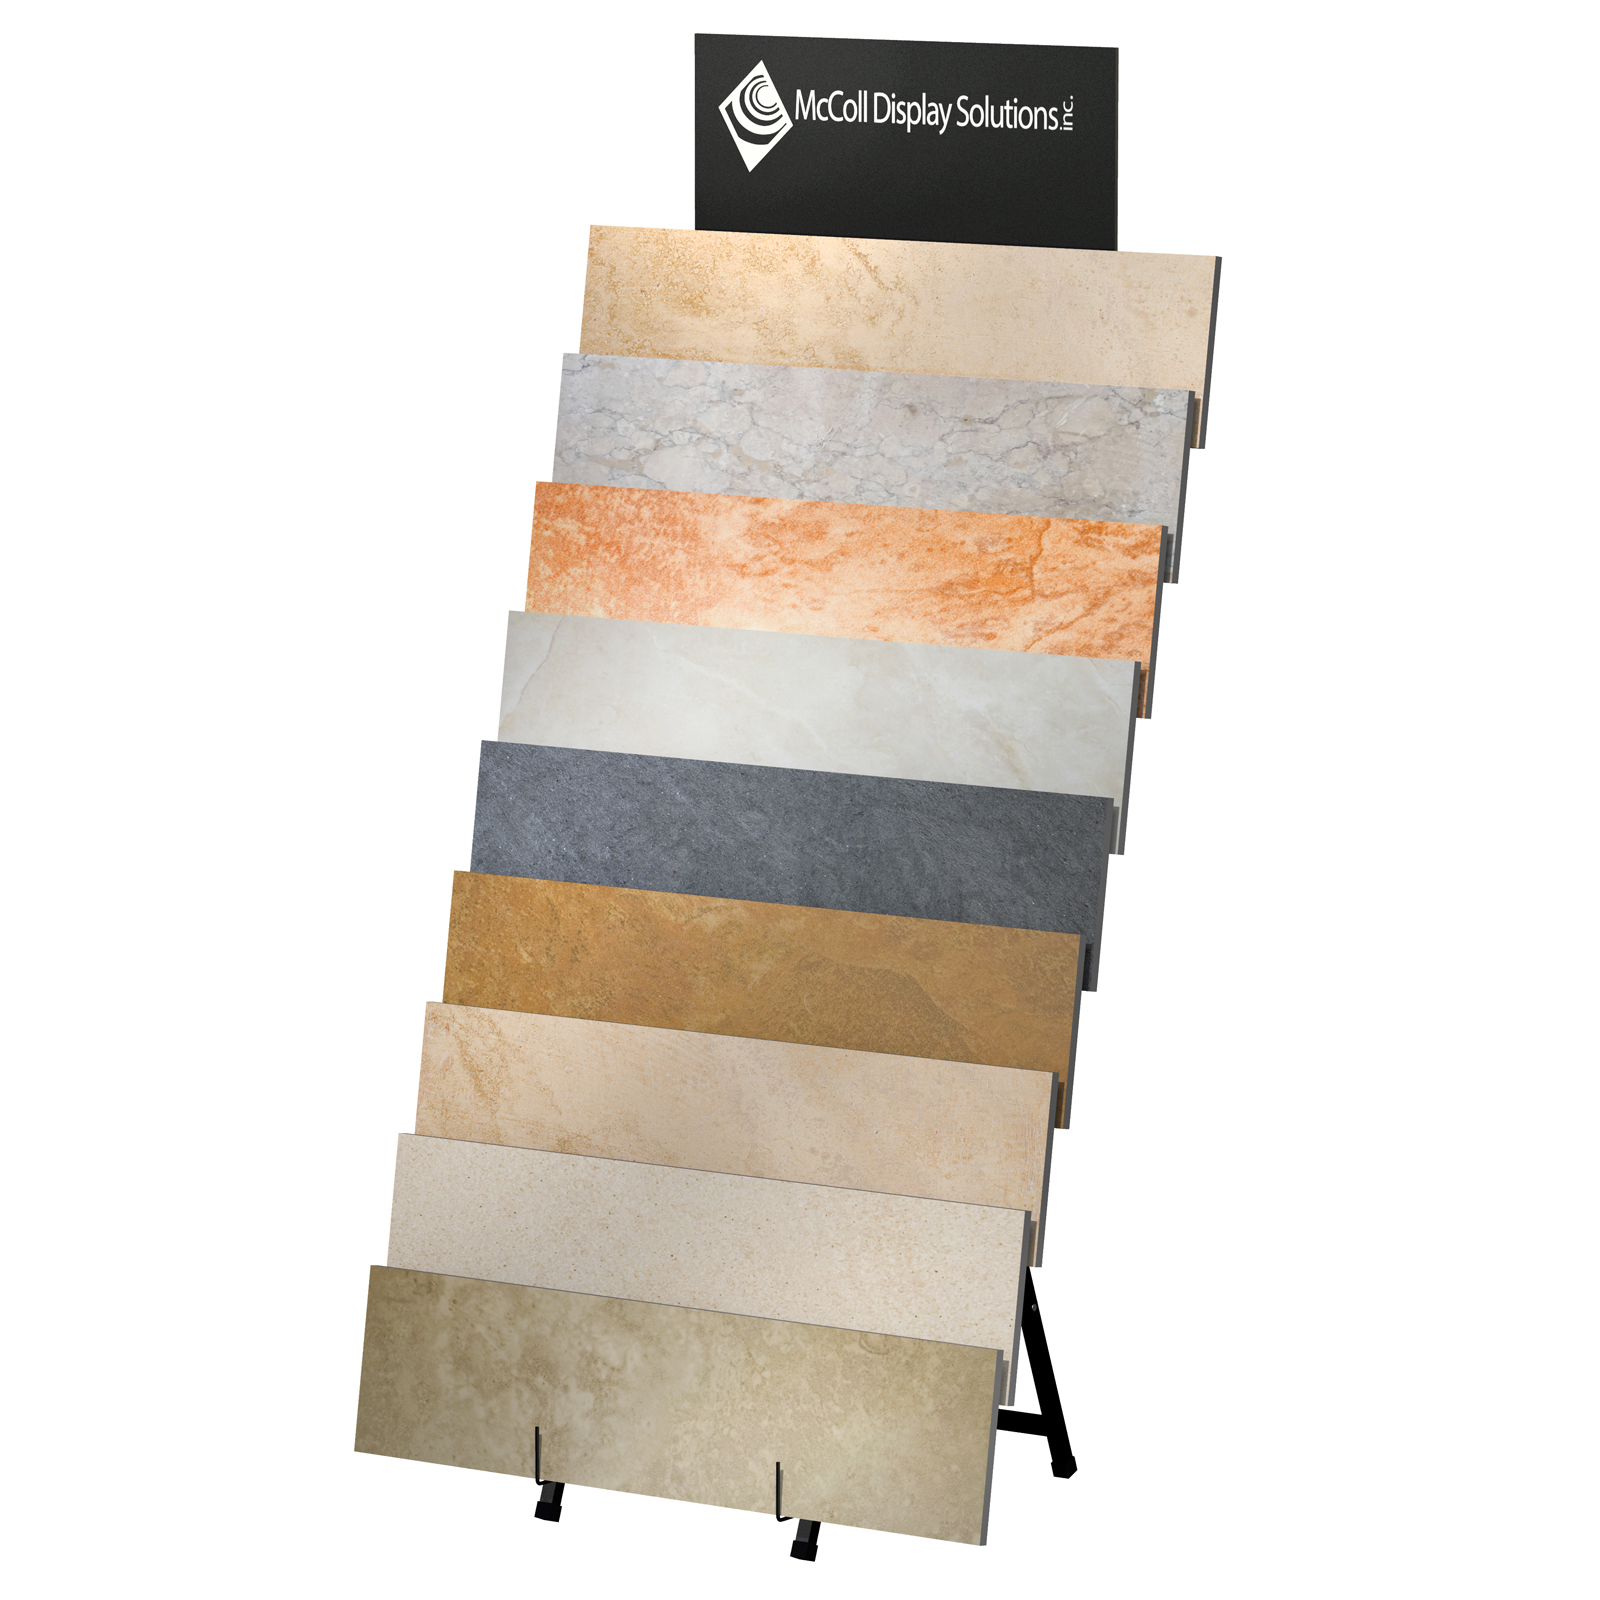 A99 Steel Frame Easel Display for Plank Style Ceramic Samples